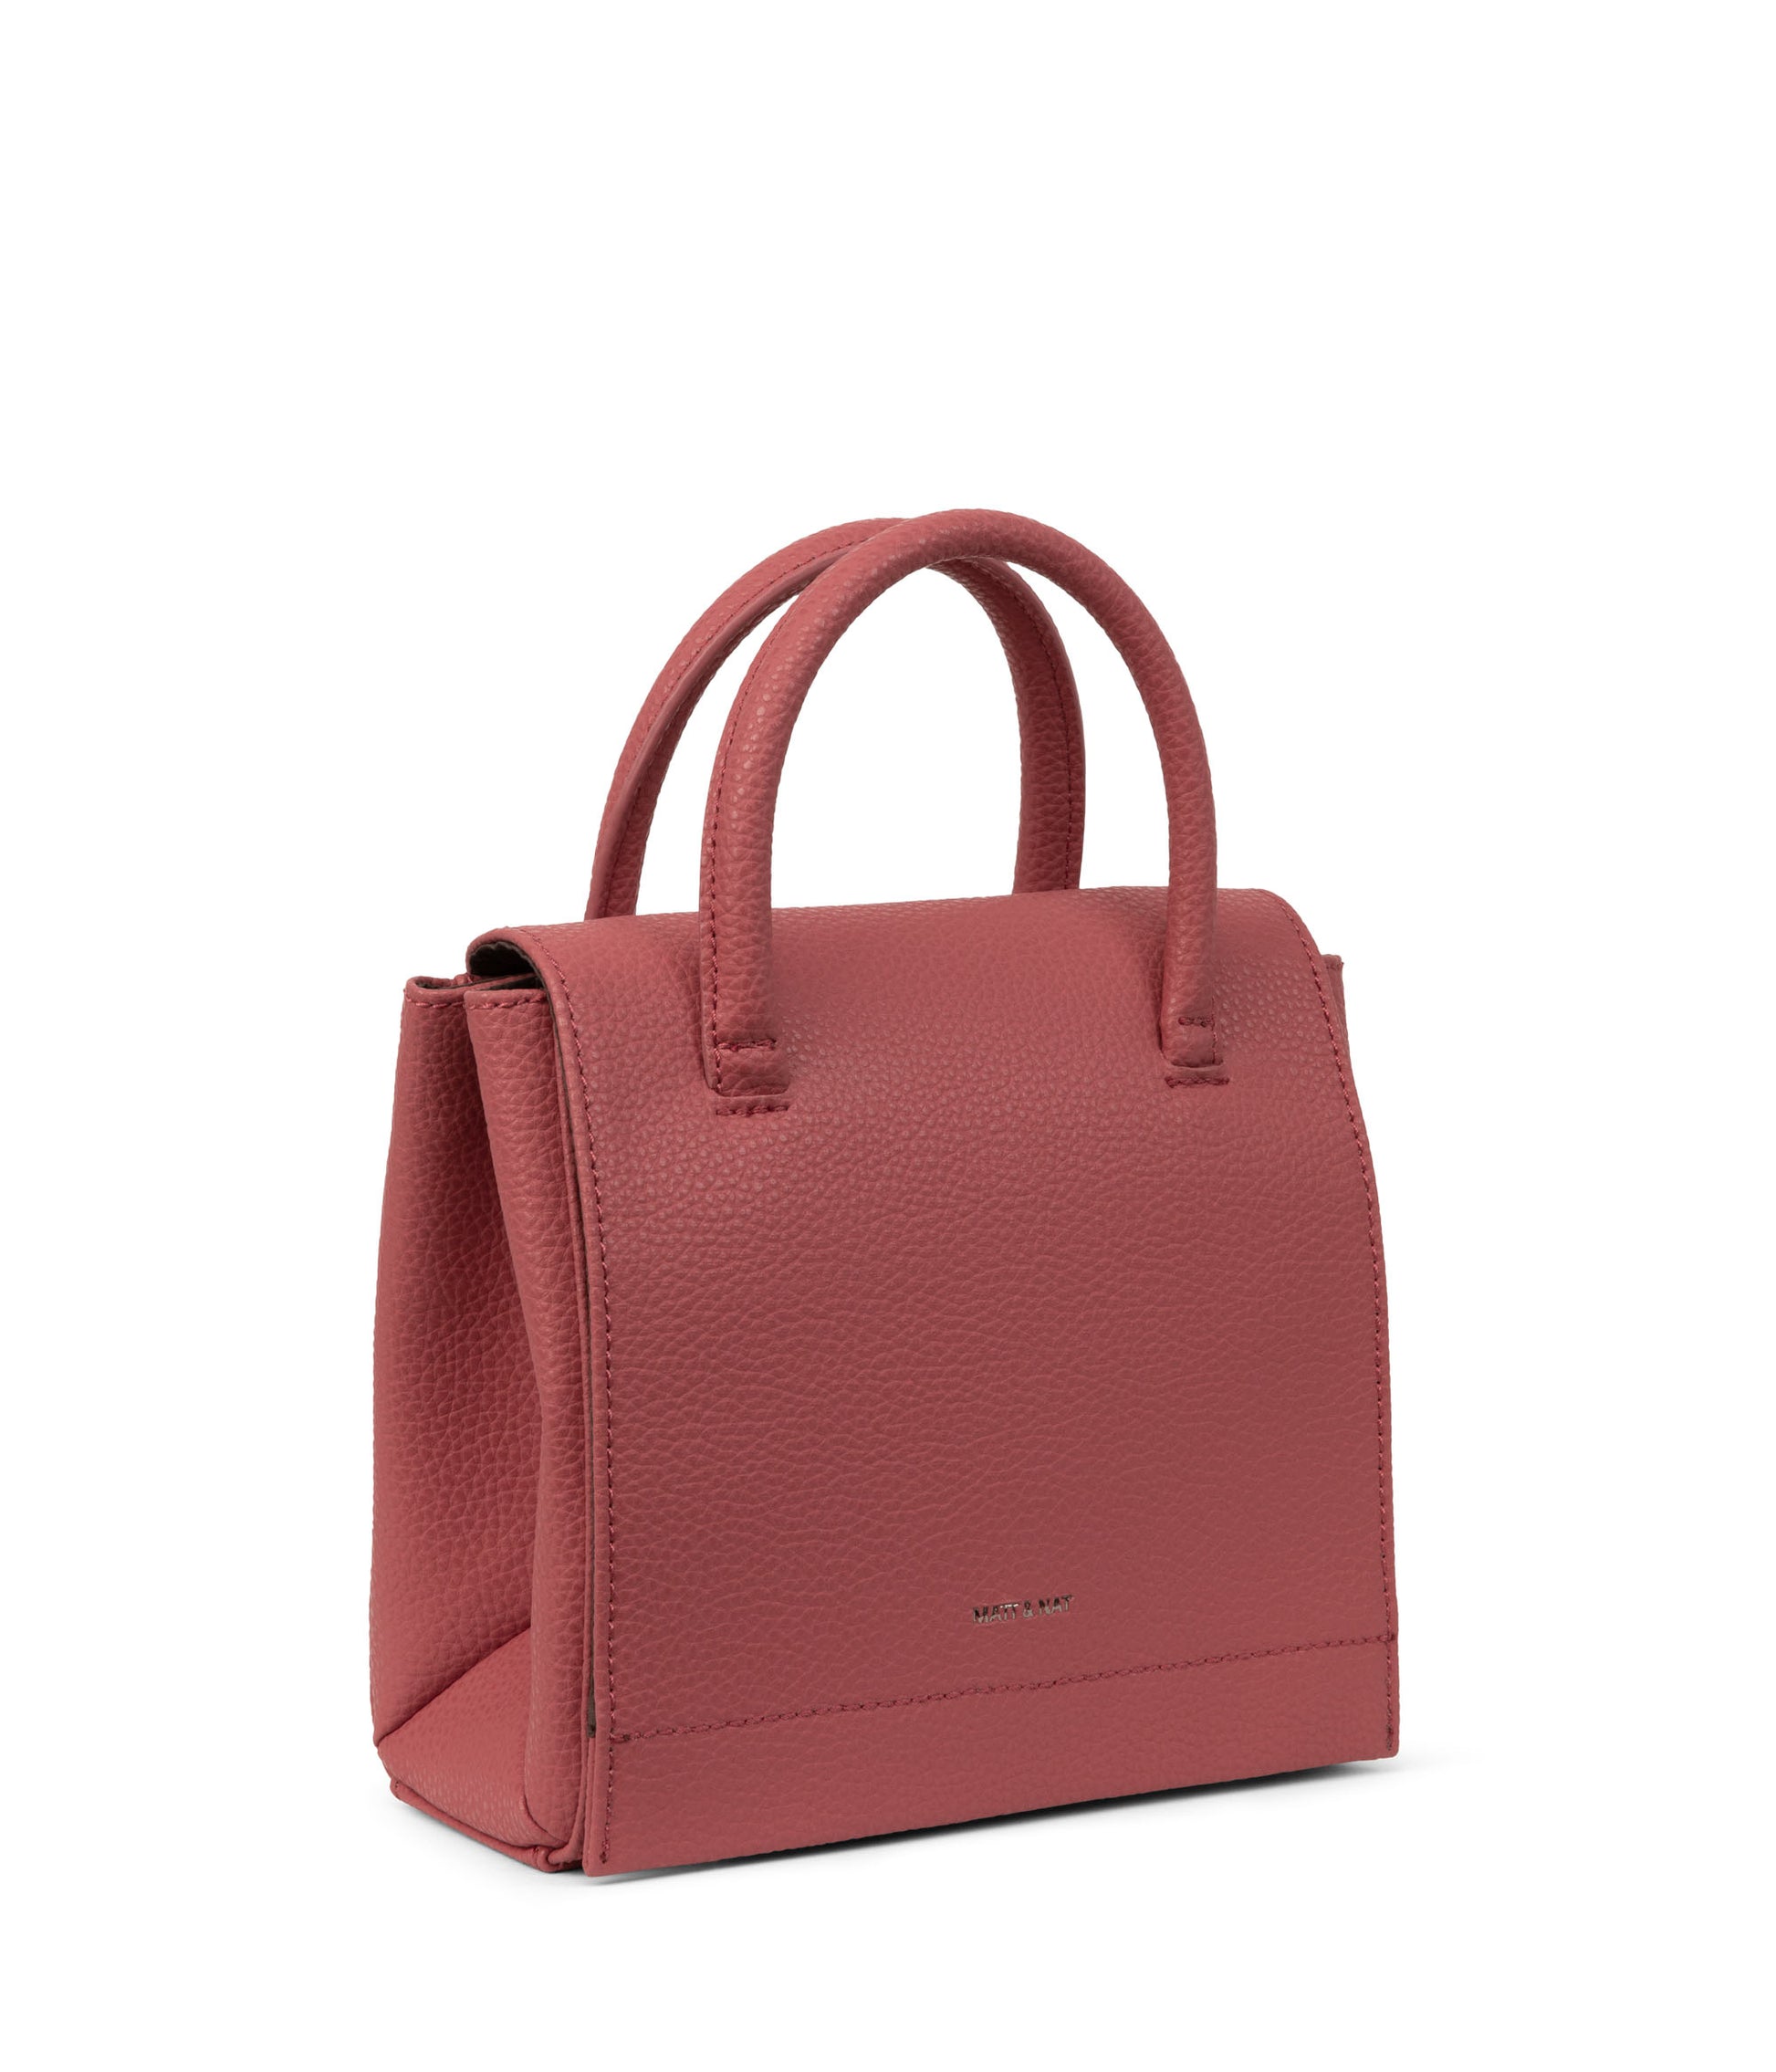 ADELSM Small Vegan Satchel - Purity | Color: Red - variant::lychee